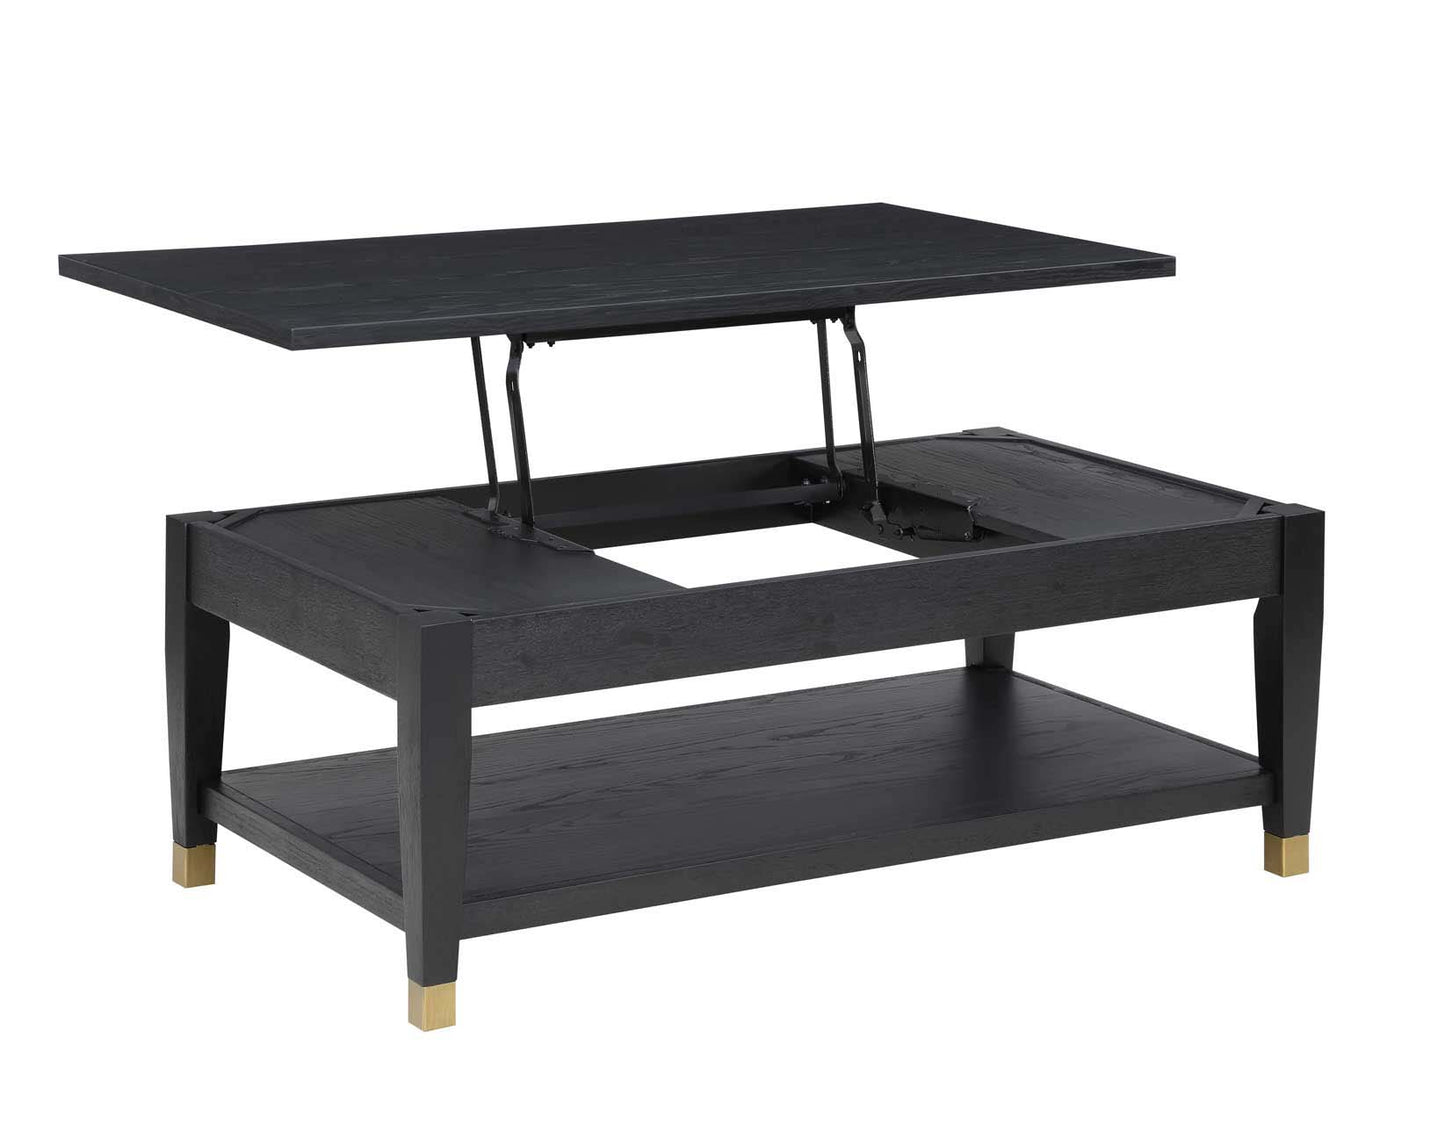 Yves Lift-Top Coffee Table by Steve Silver